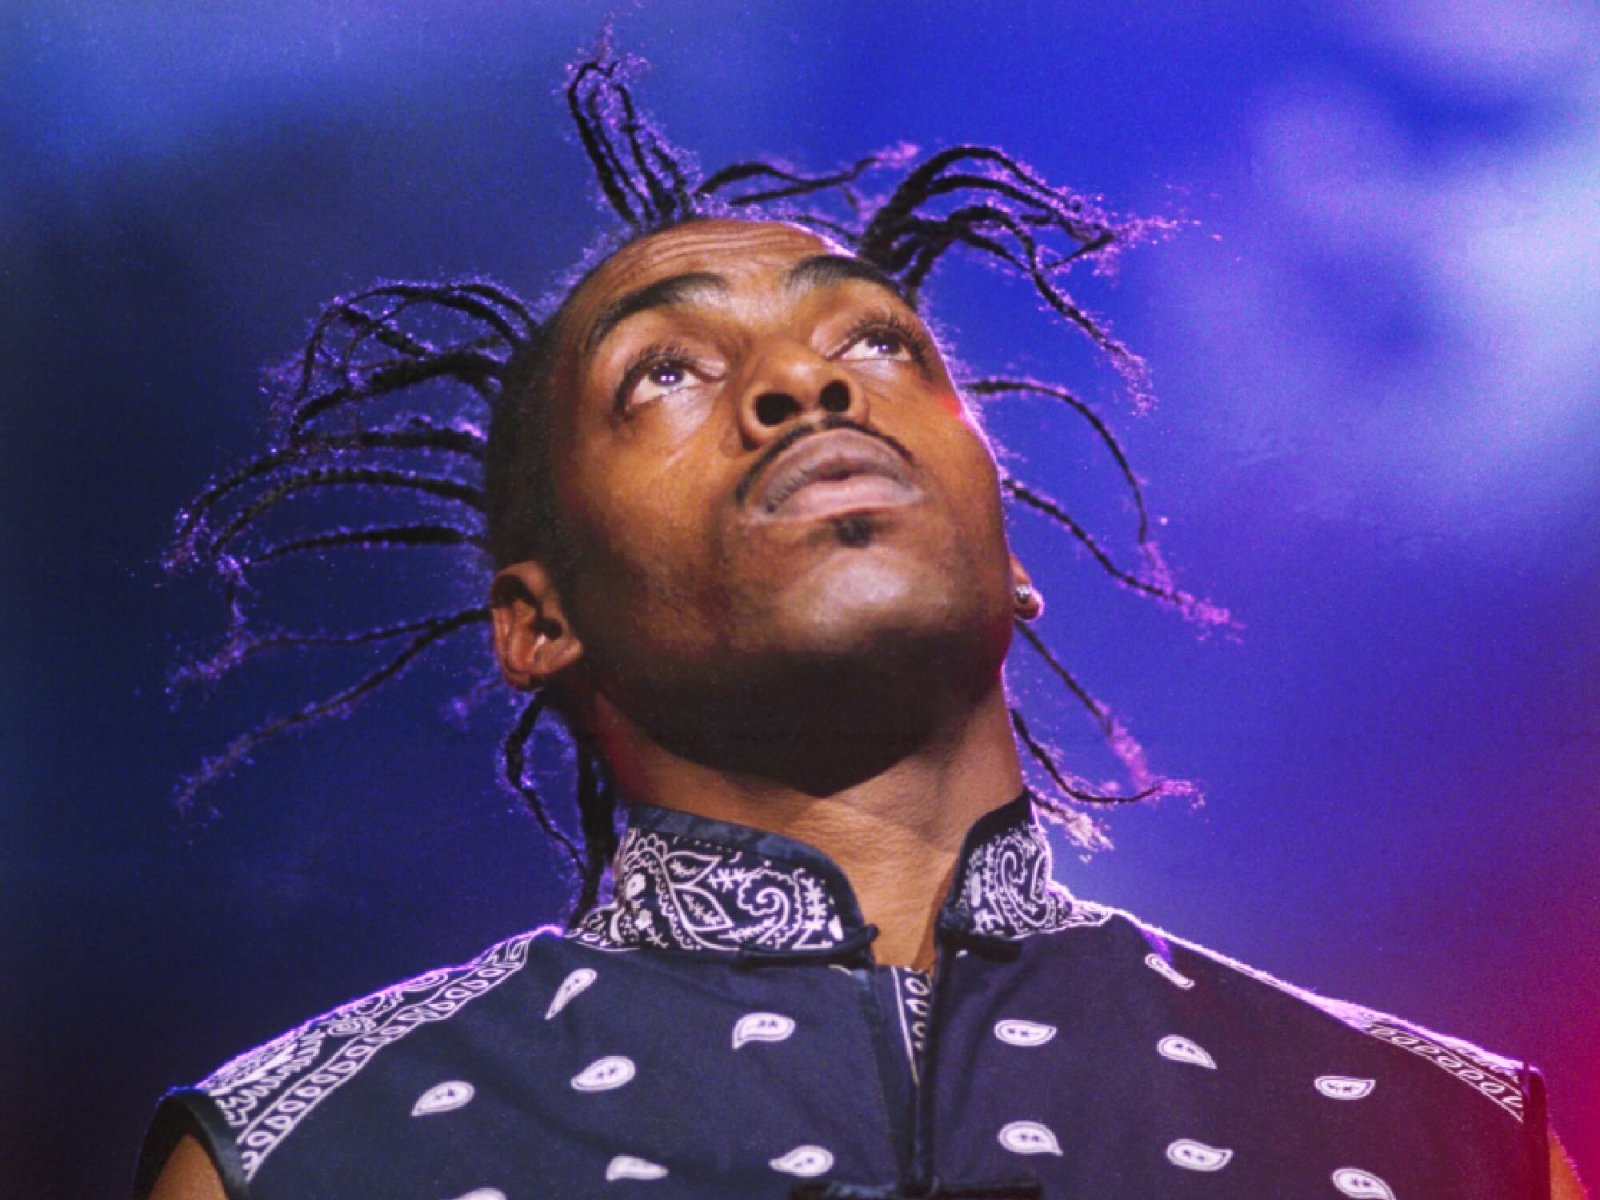 Rapper Coolio dead at 59 after reported cardiac arrest